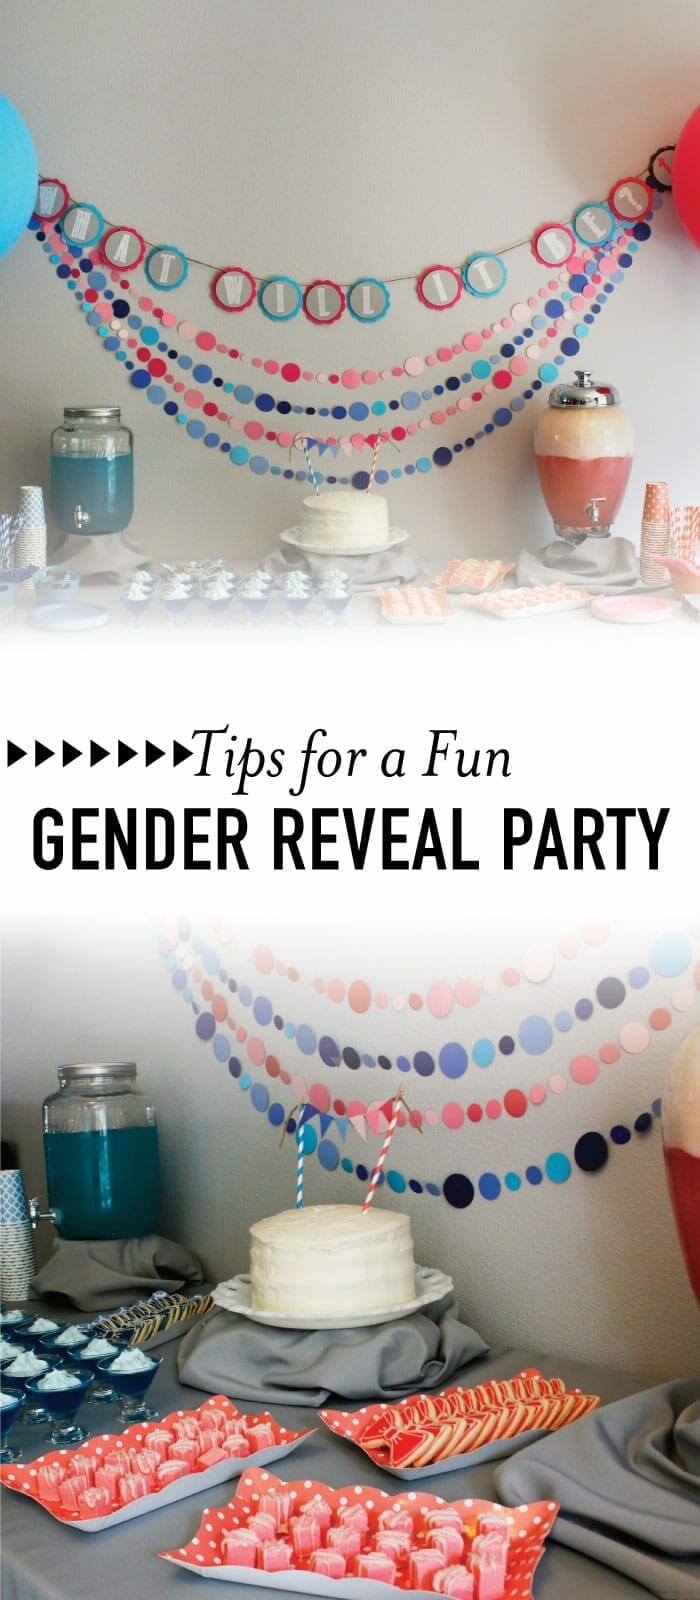 Tips for a DIY Gender Reveal Party | Tutorials and other Ideas